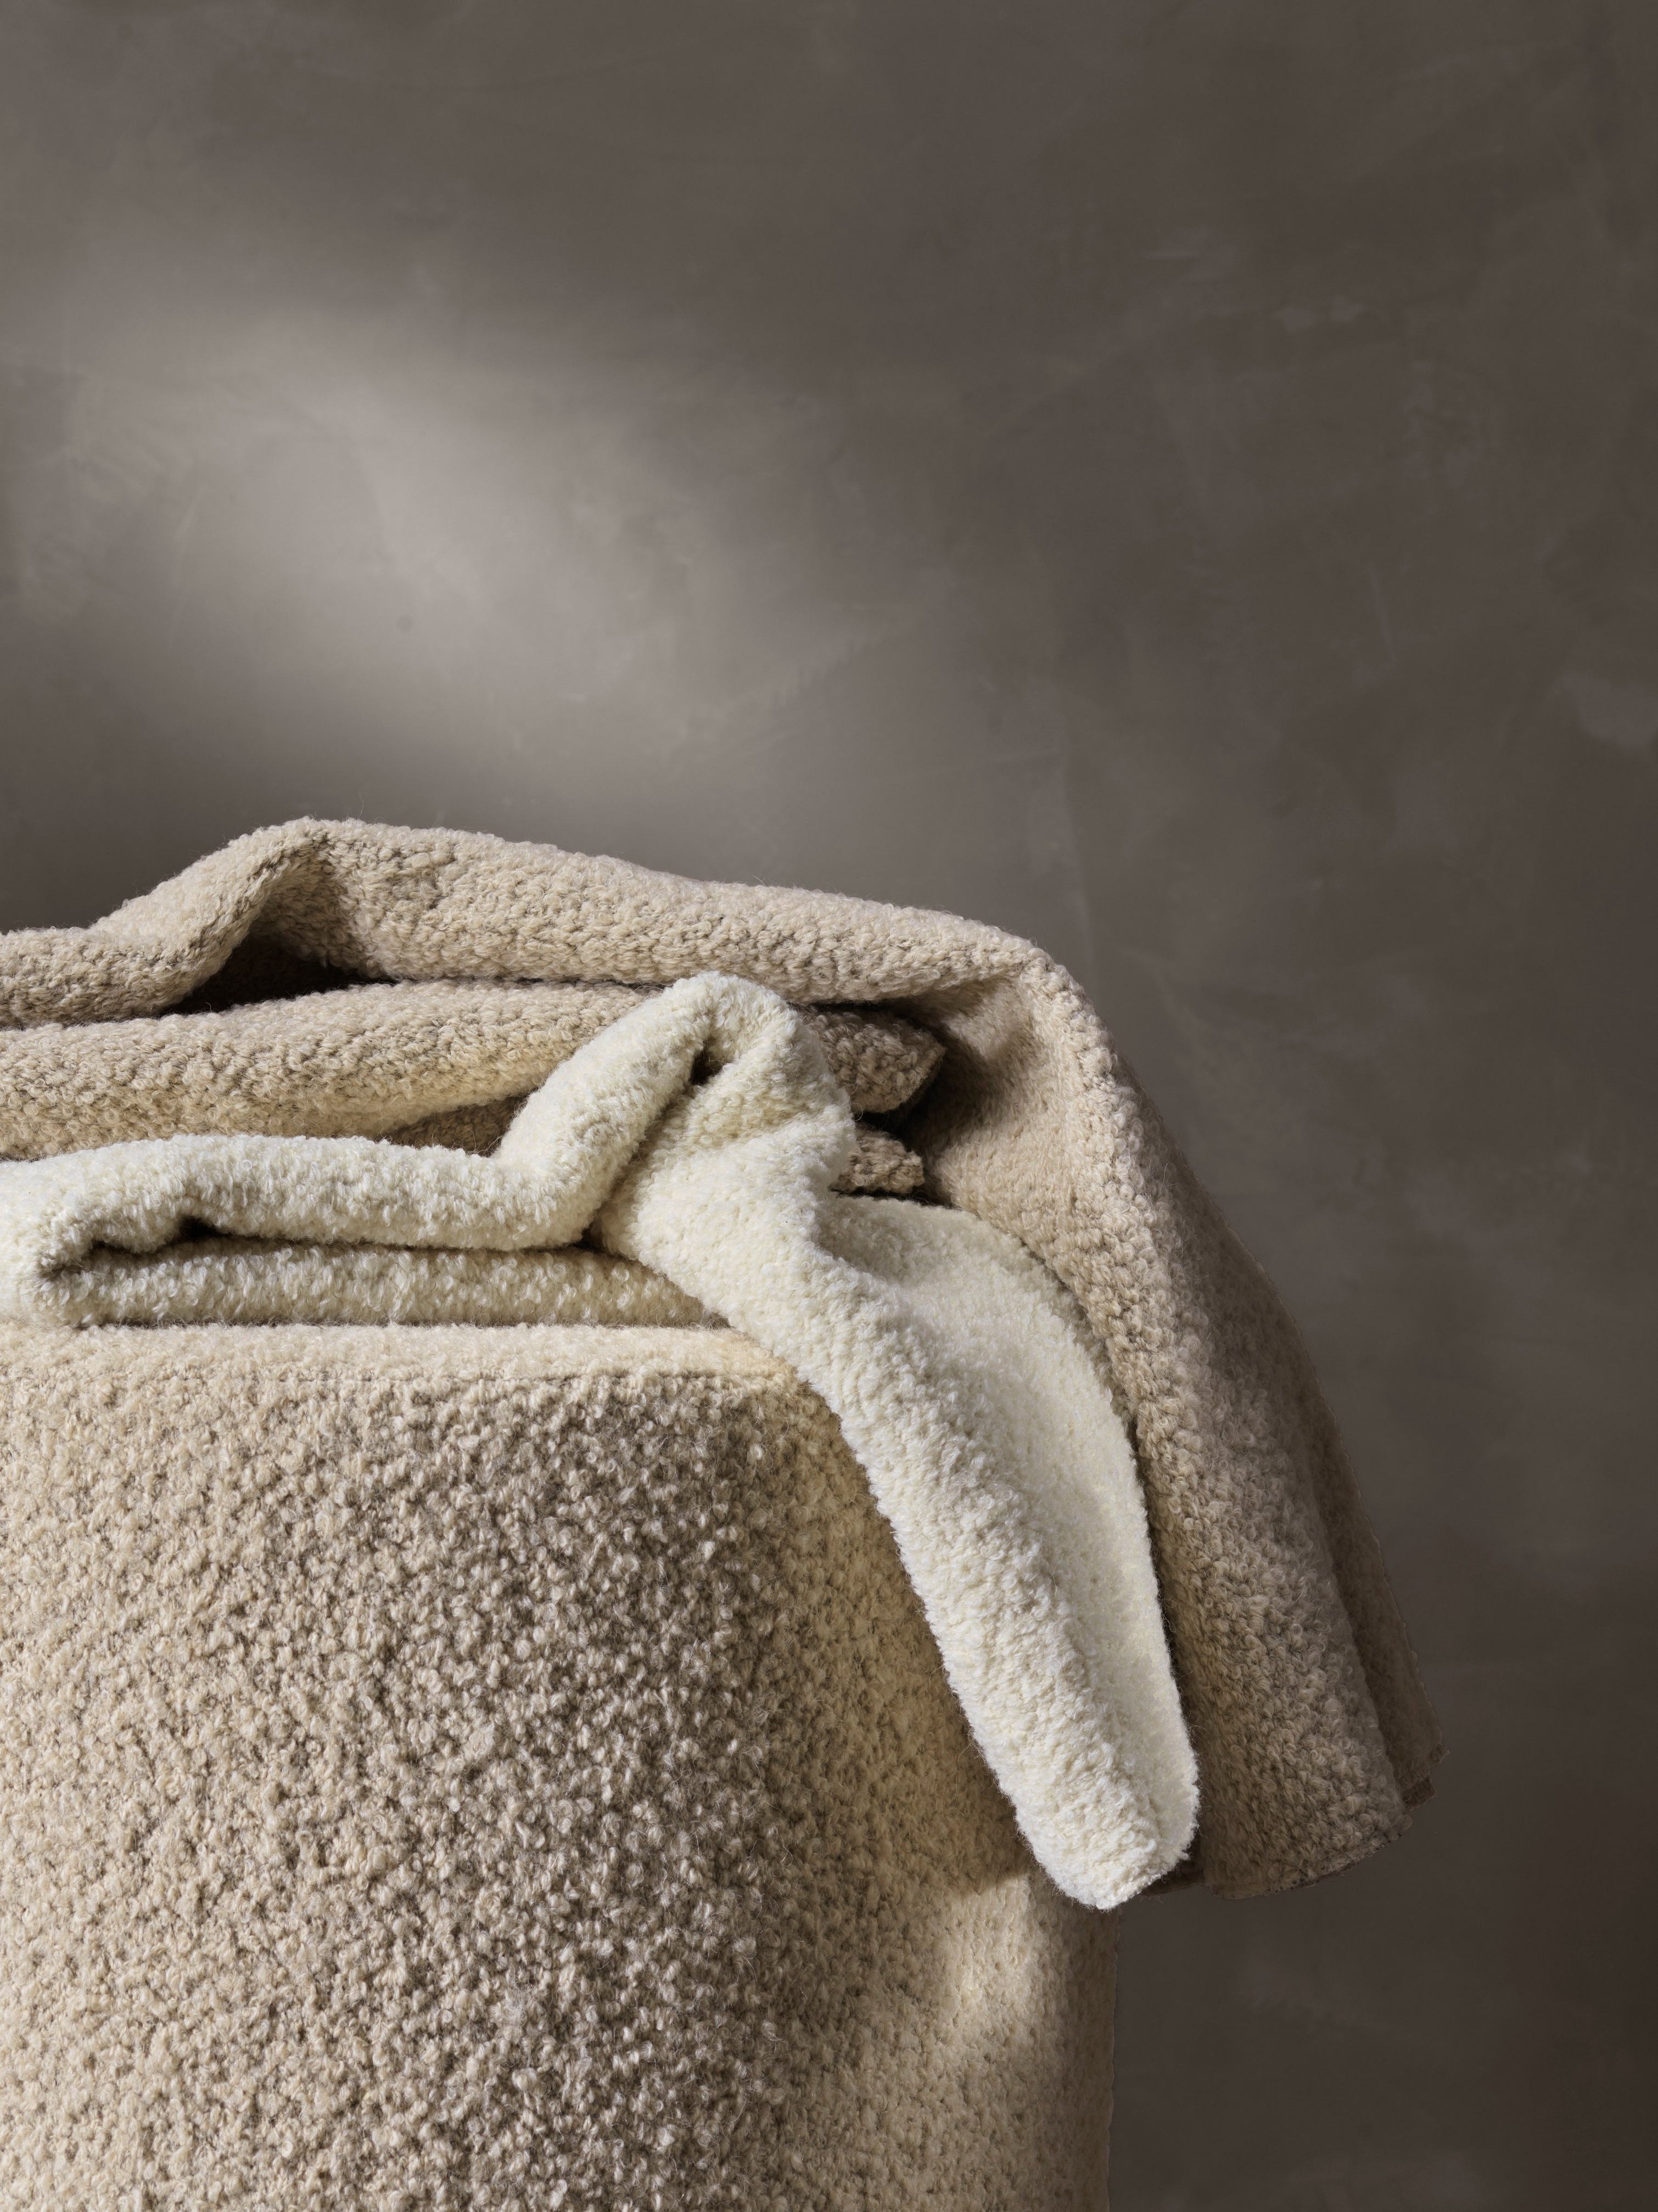 Textured bouclé fabric draped over an object with a soft, plush appearance